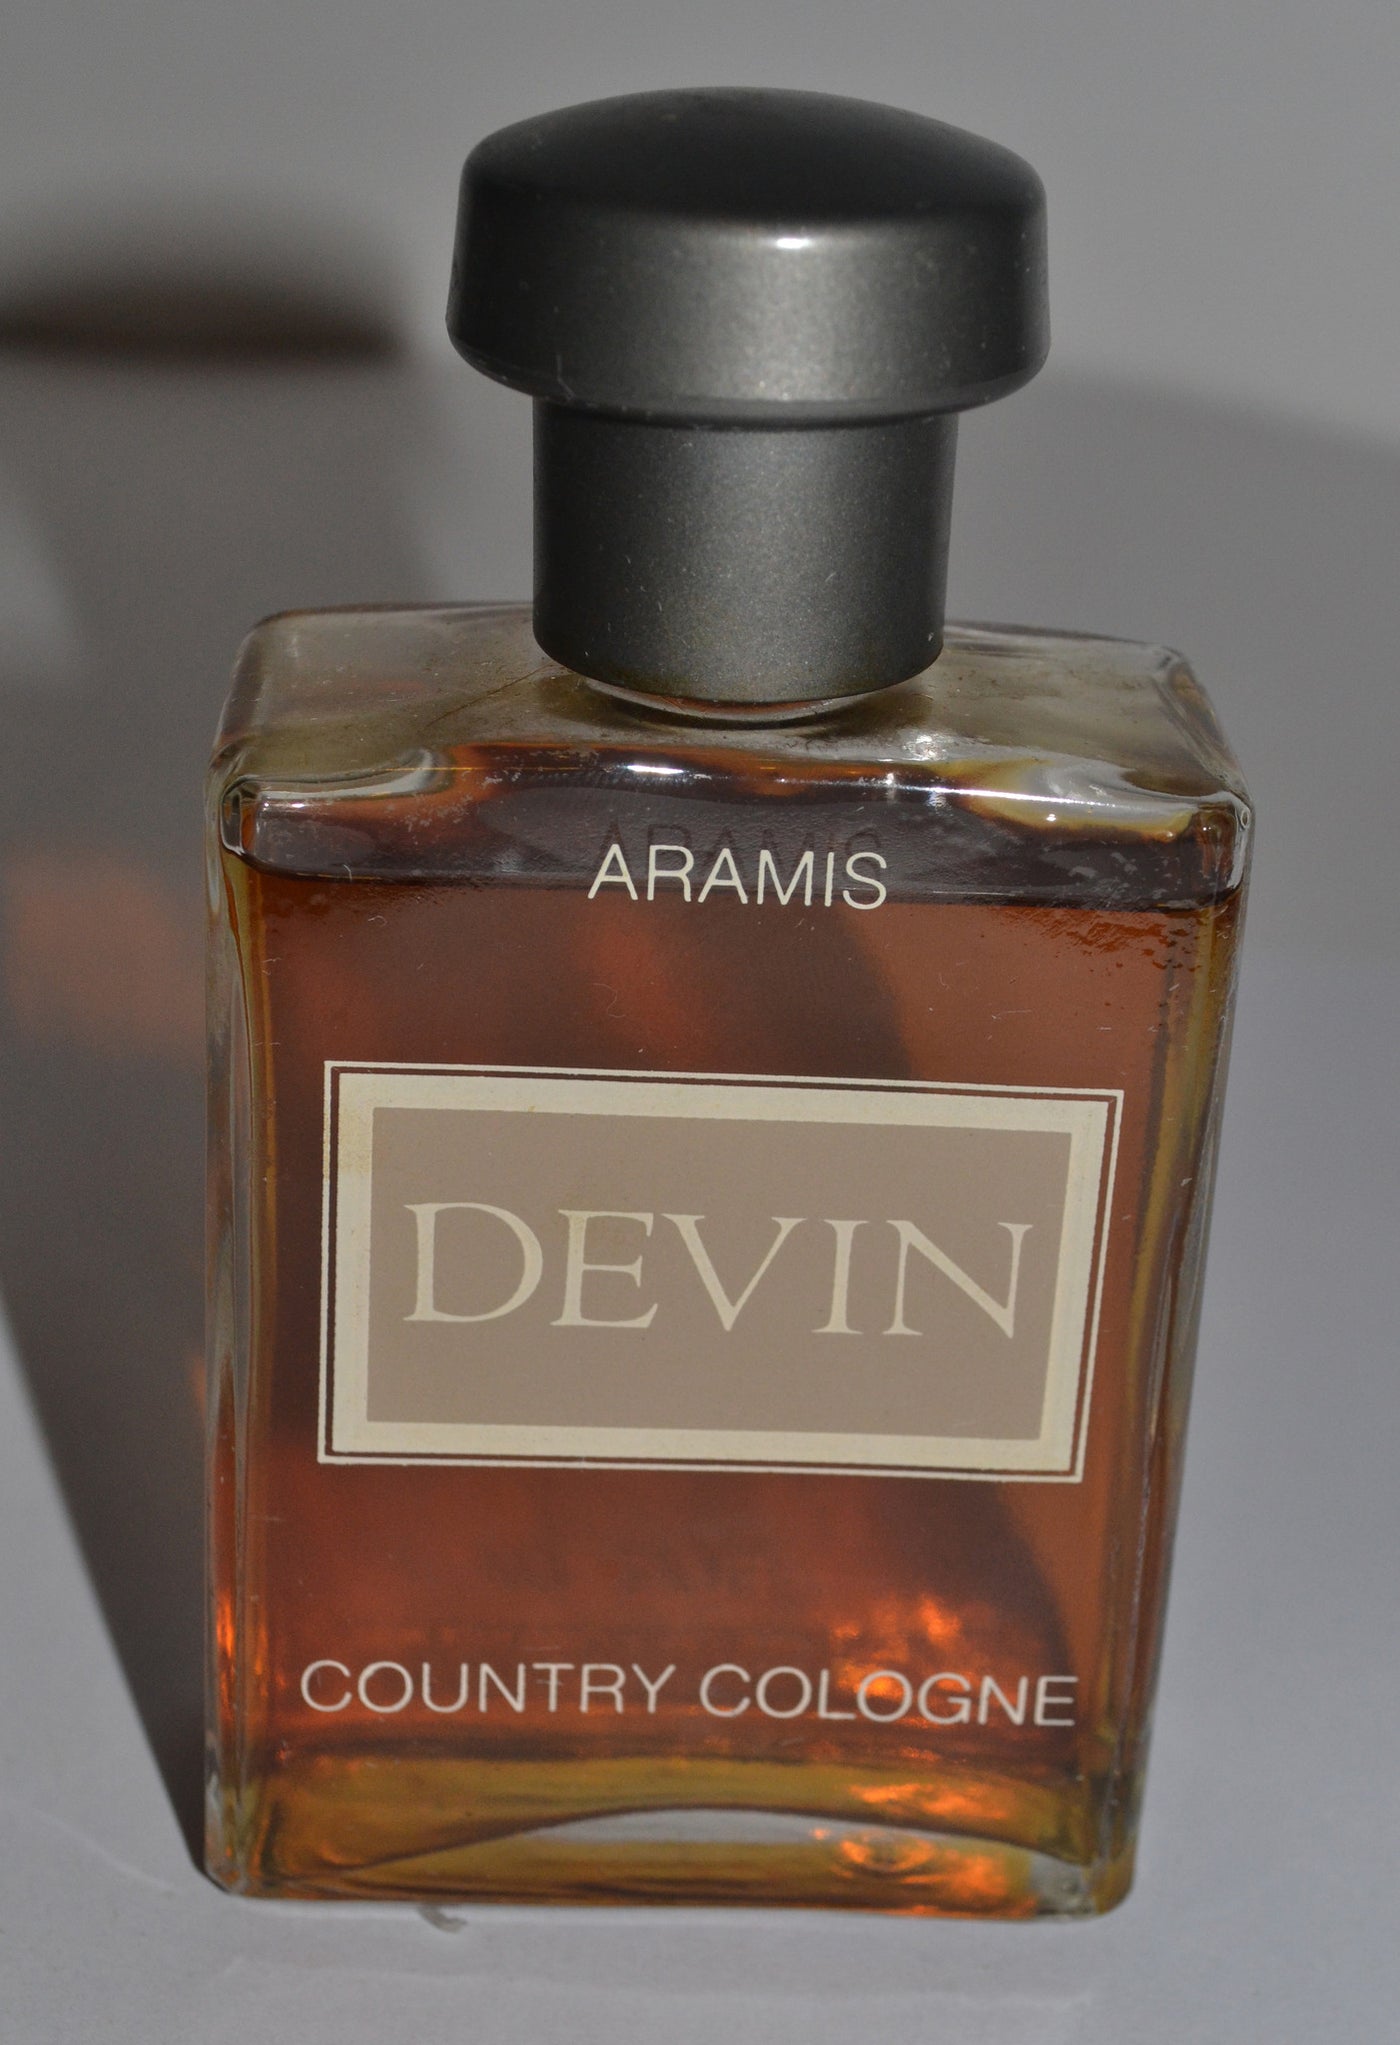 Aramis Devin Country Cologne